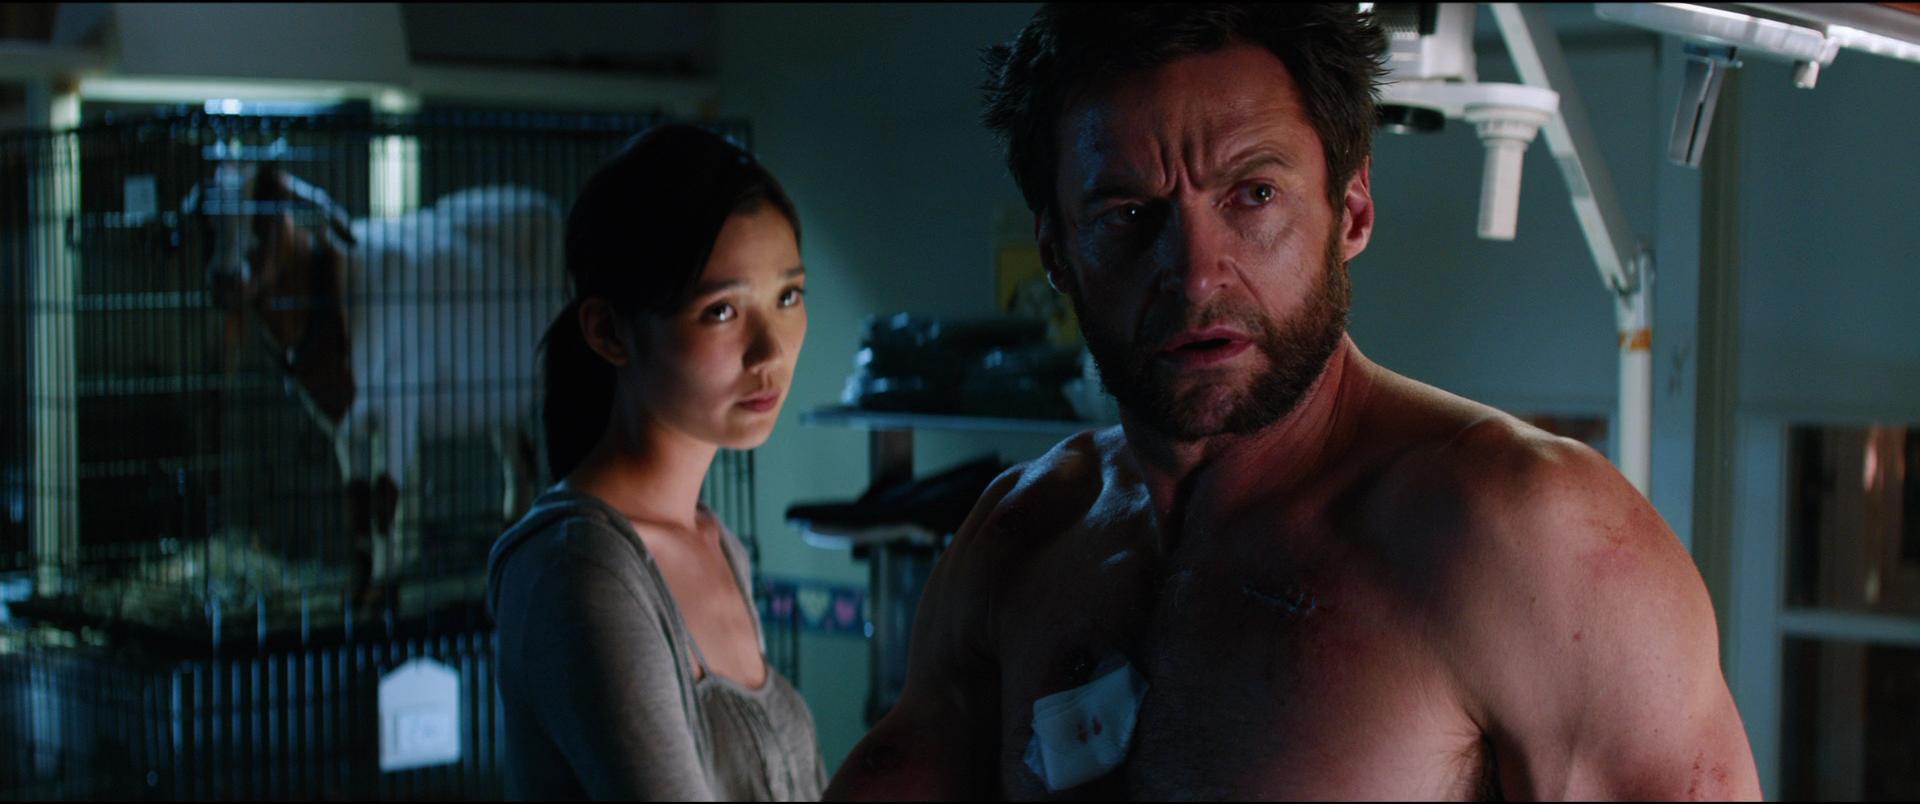 the wolverine 2013 full movie free download utorrent for windows